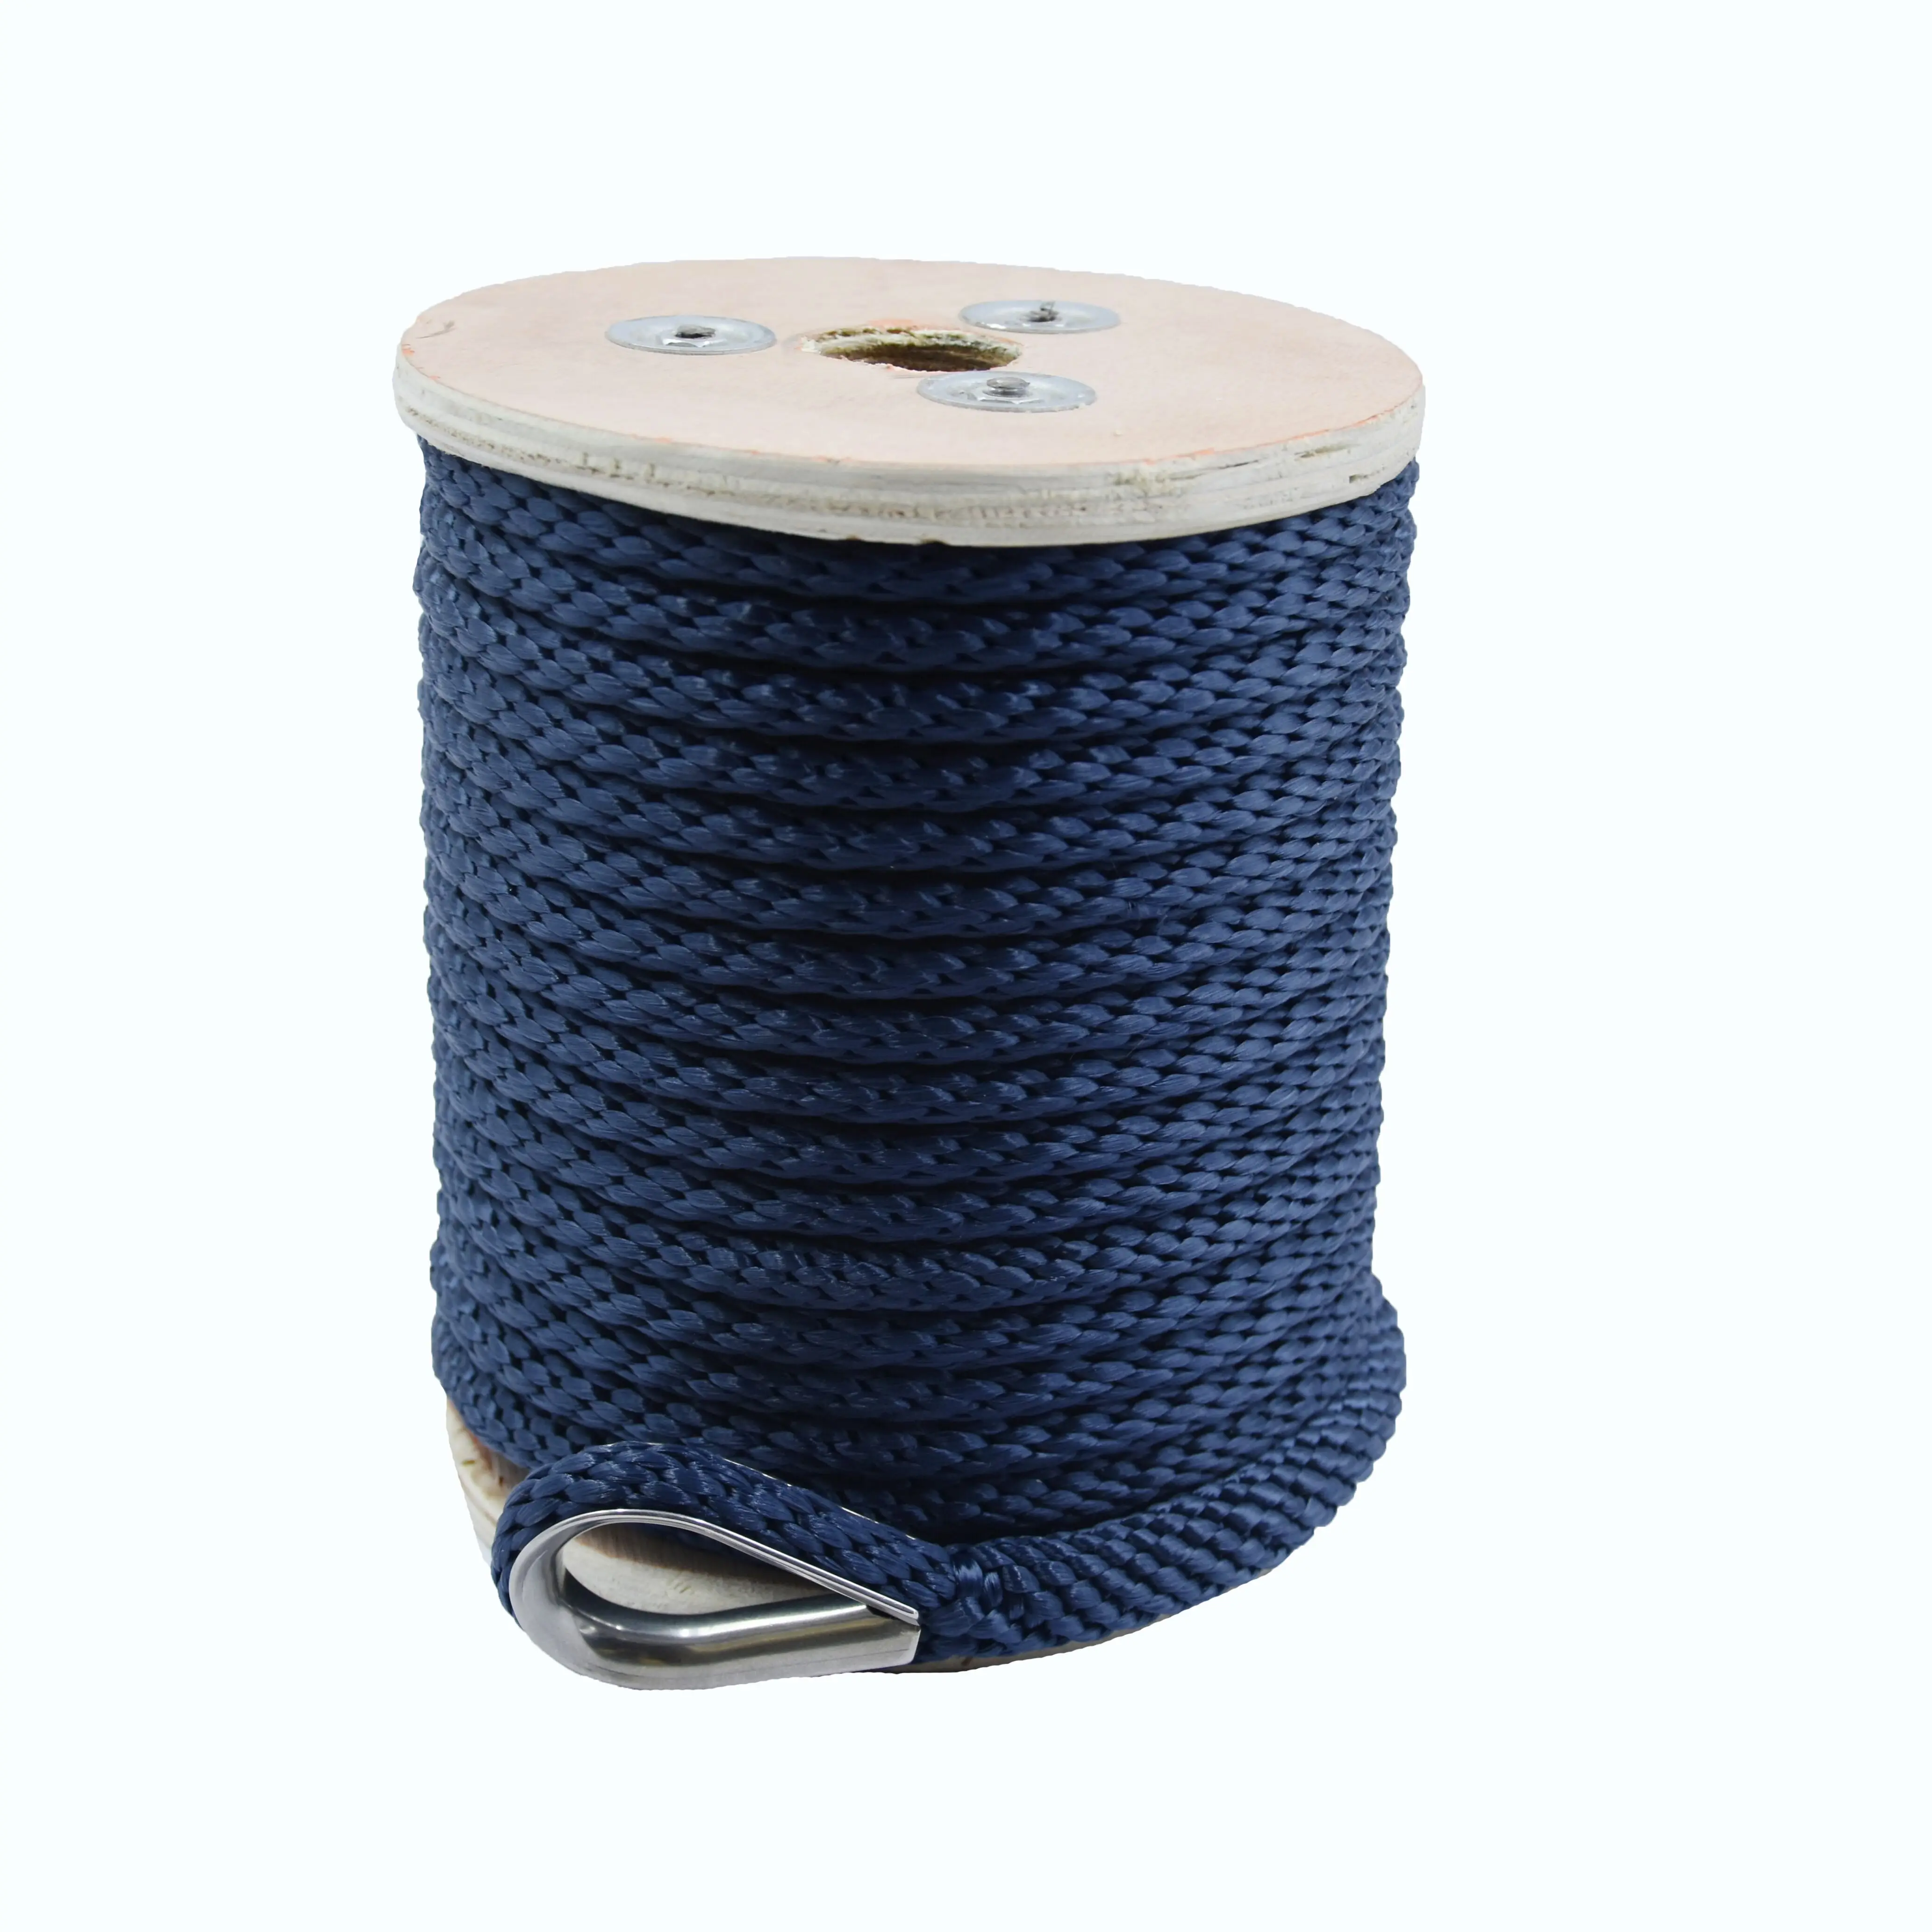 High performance hot sale customized package and size solid braided polypropylene/ PP mooring marine anchor rope